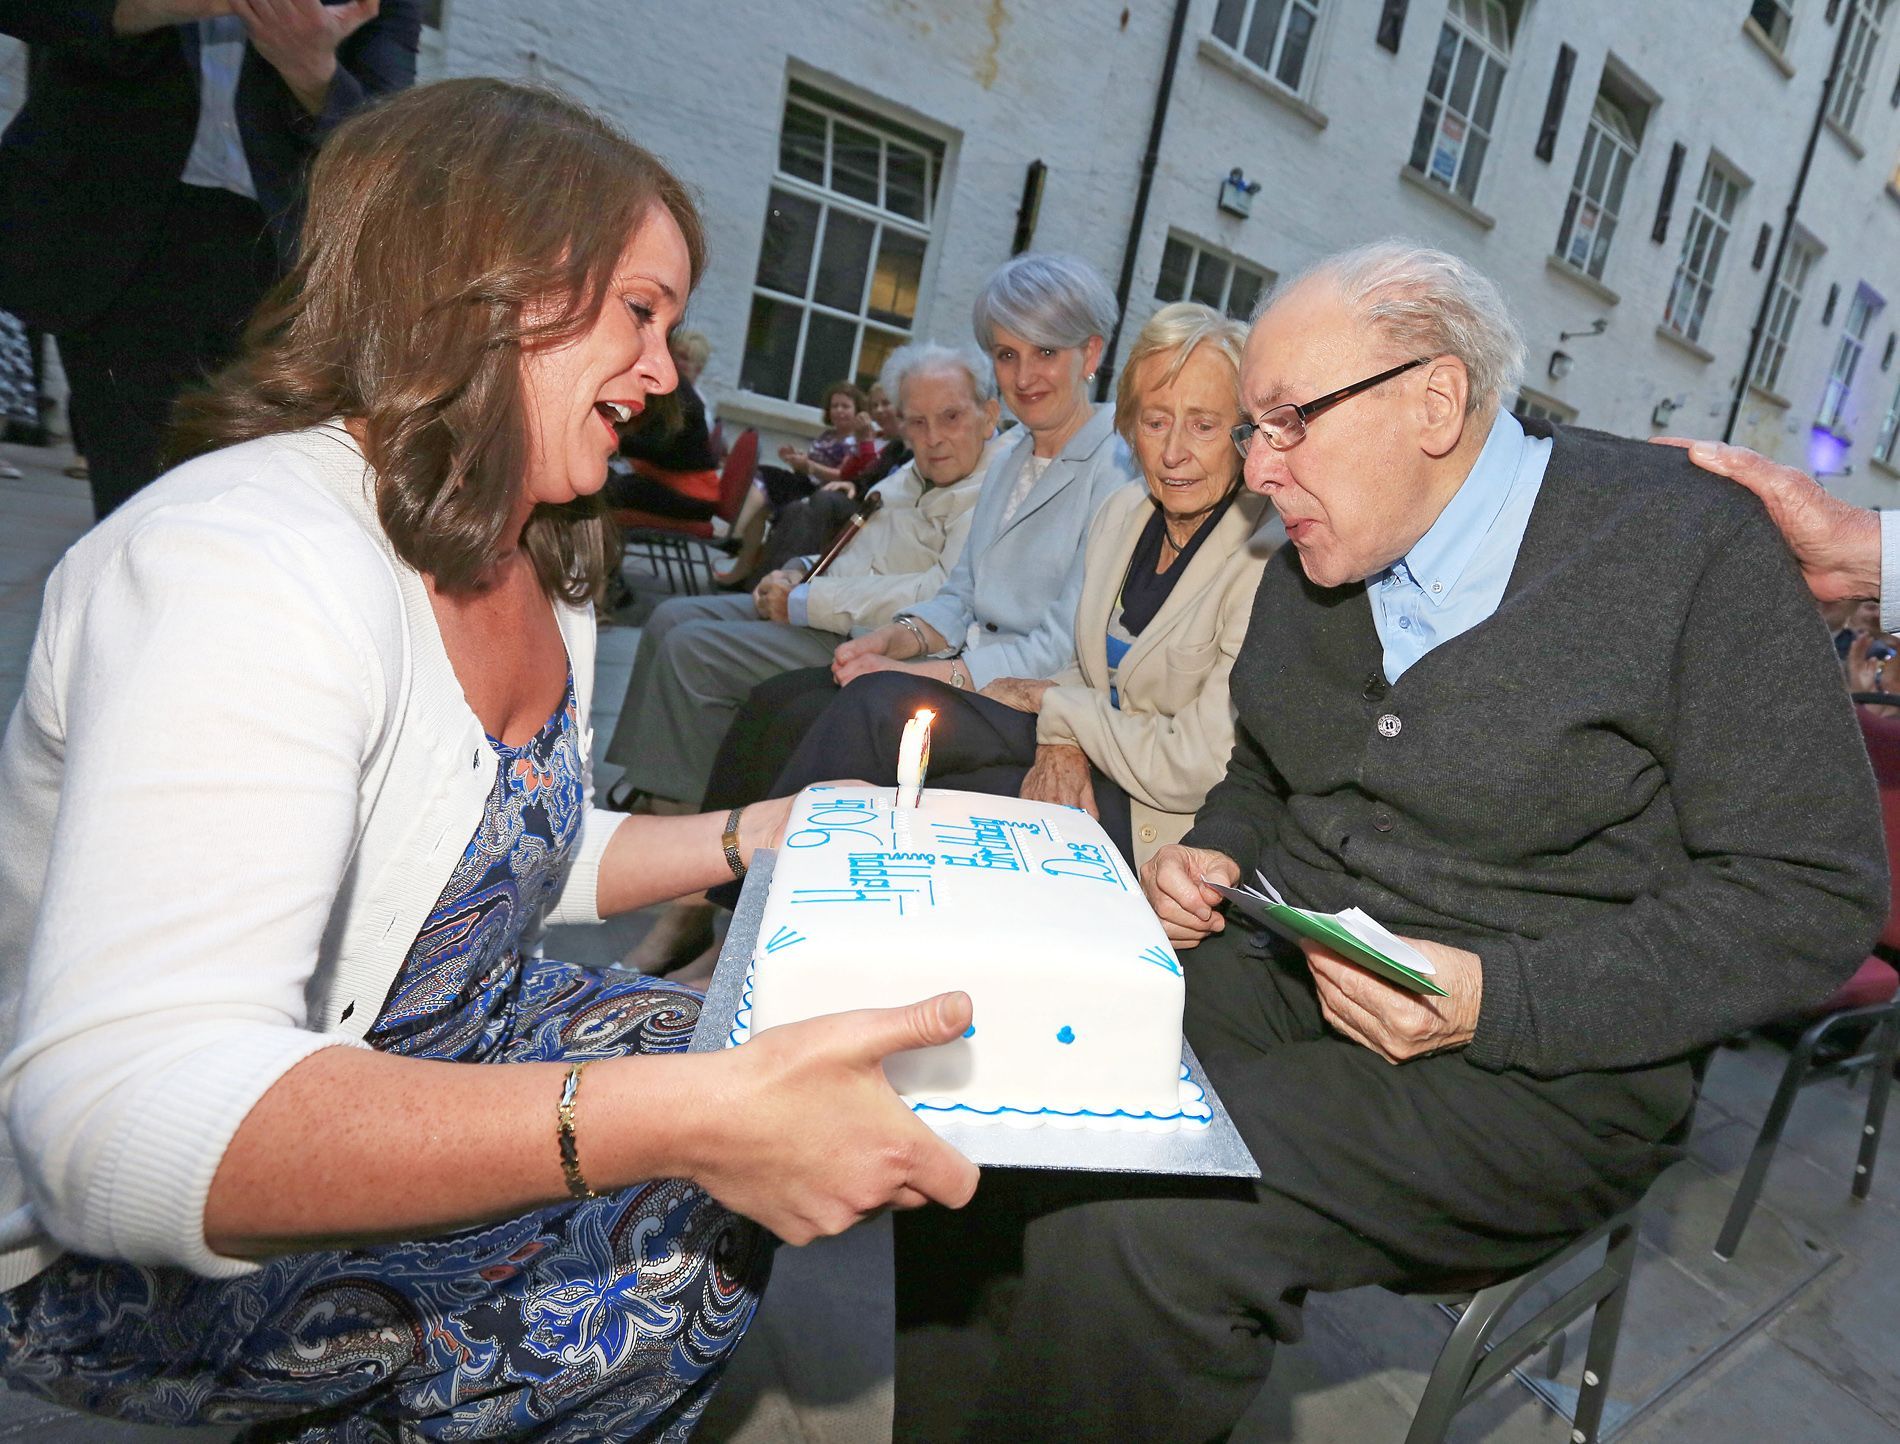 Fr Des blows out candles as friends celebrate his 90th birthday in 2015, four years before his death